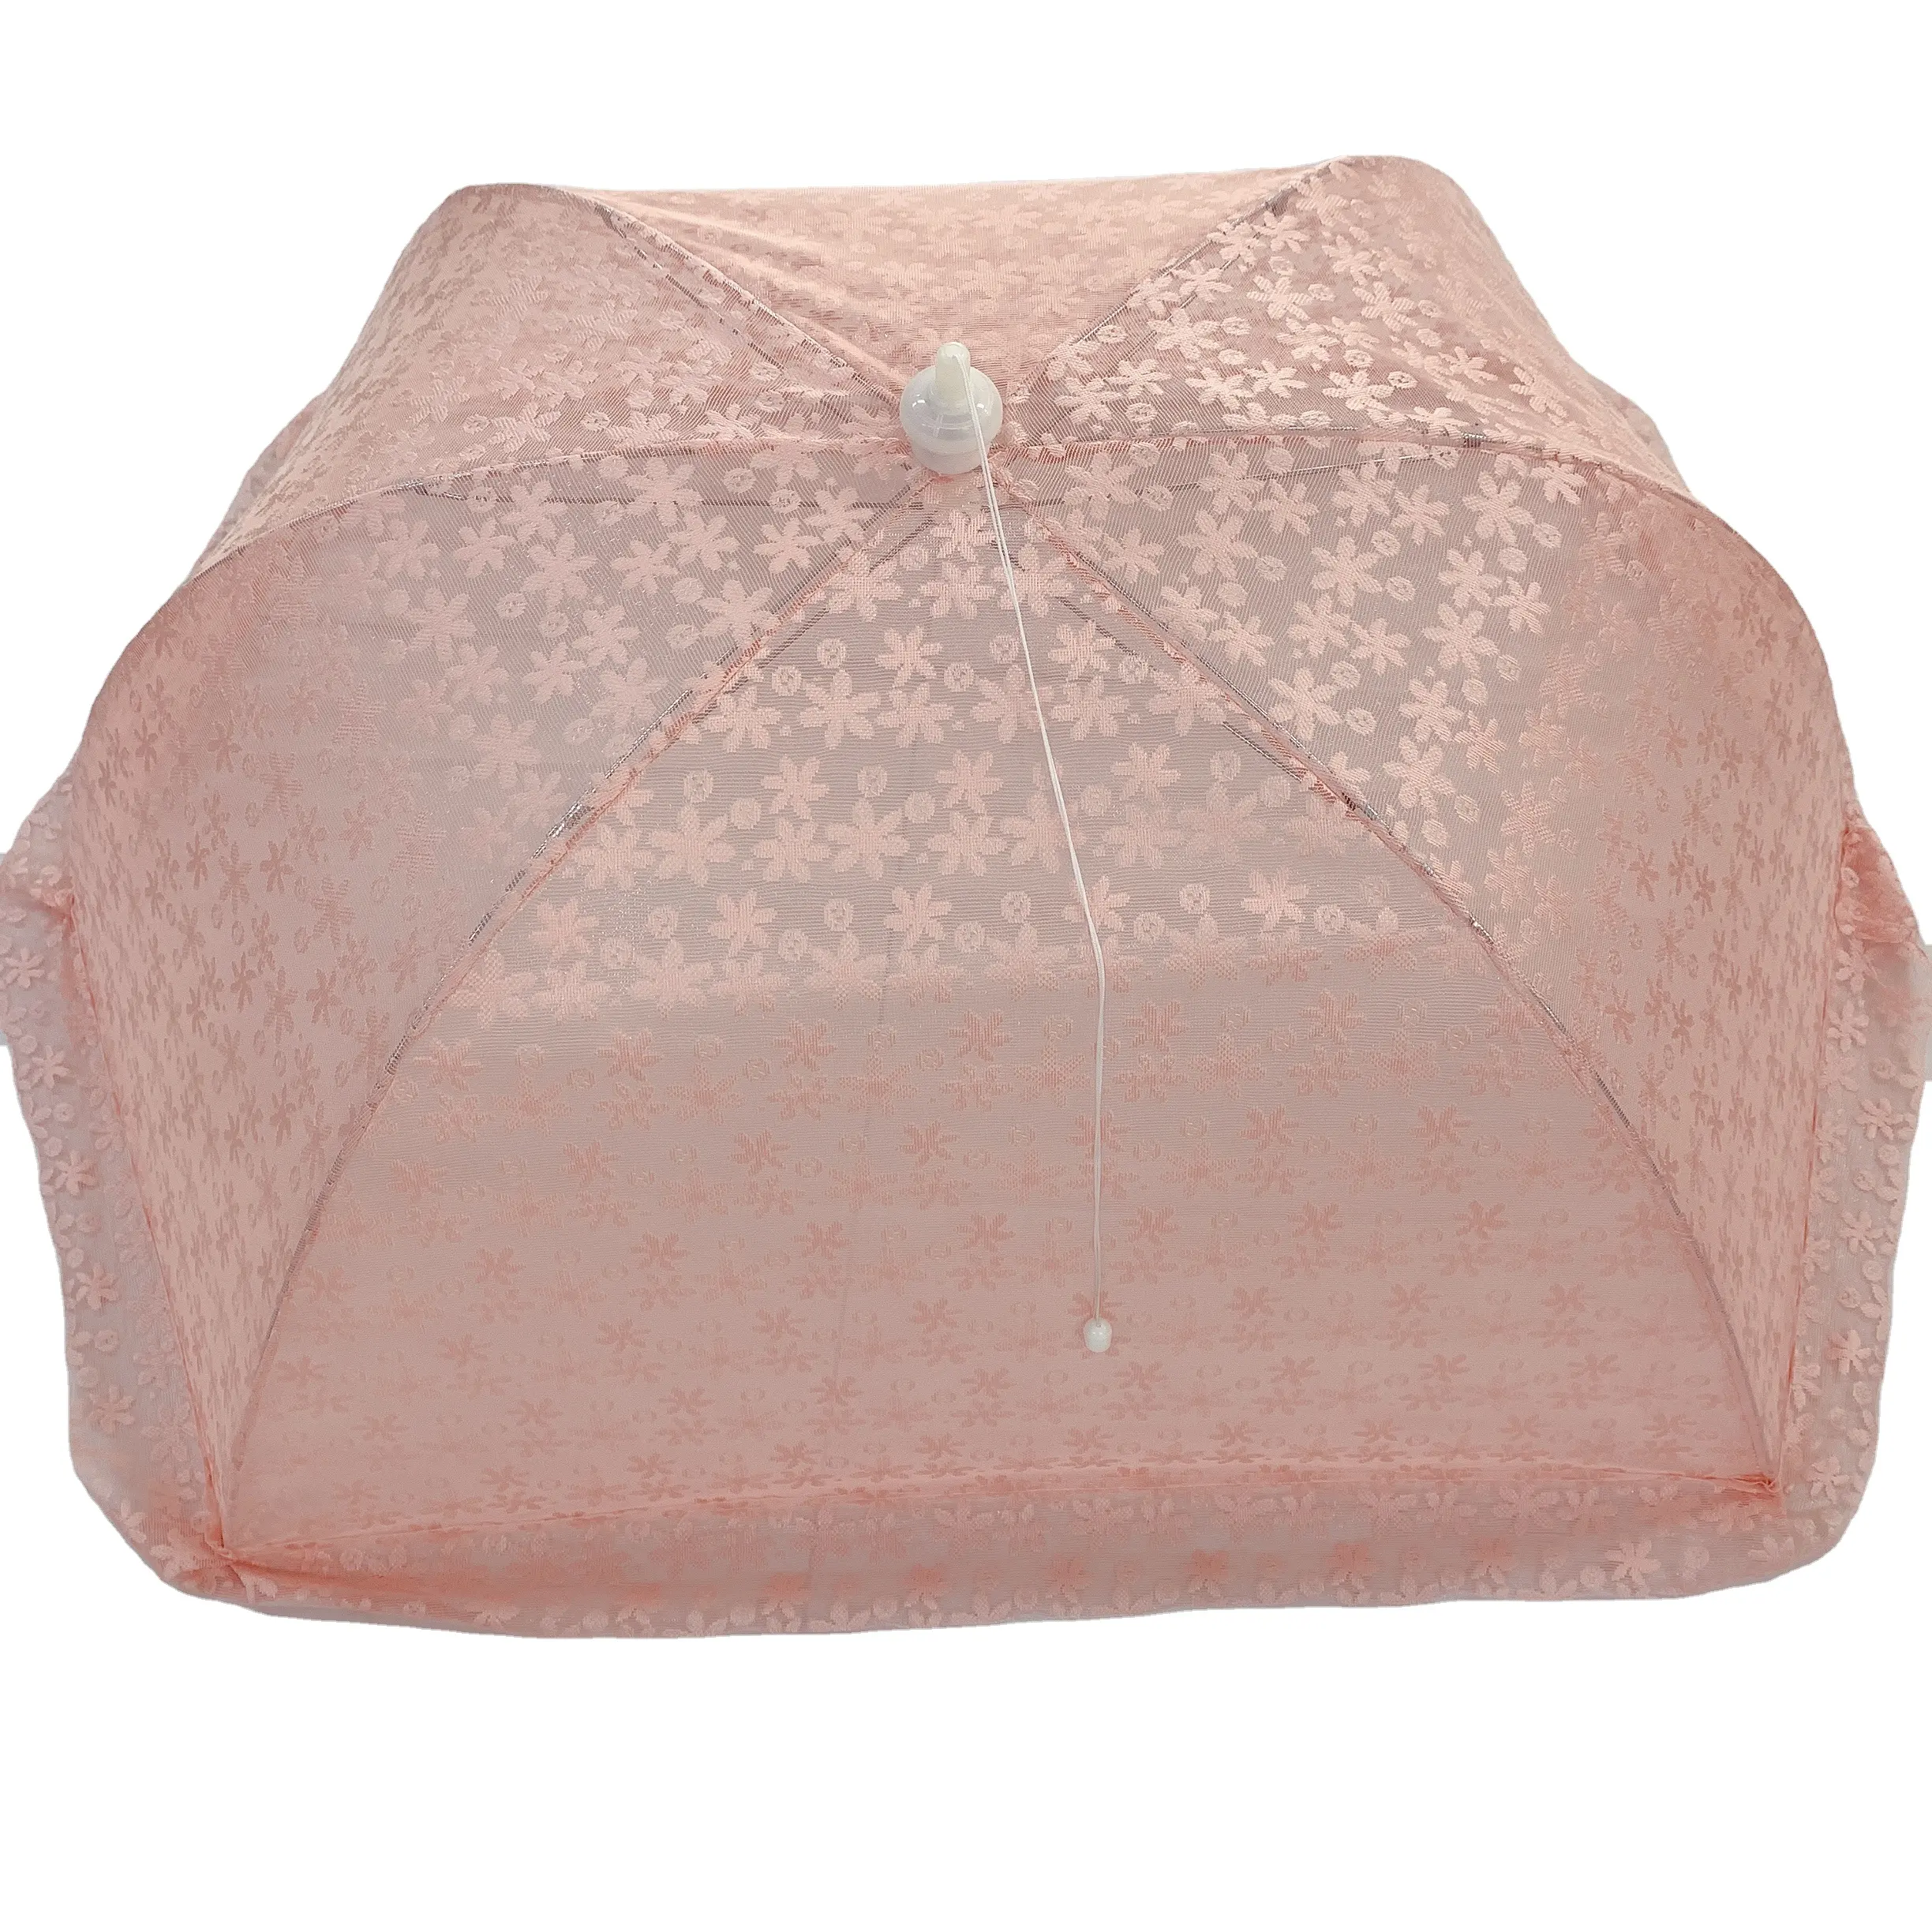 Easy carrying Luxury Home customized Baby Bed Mosquito Netting umbrella net Mesh Top Fabric Cotton Eco Material Folded